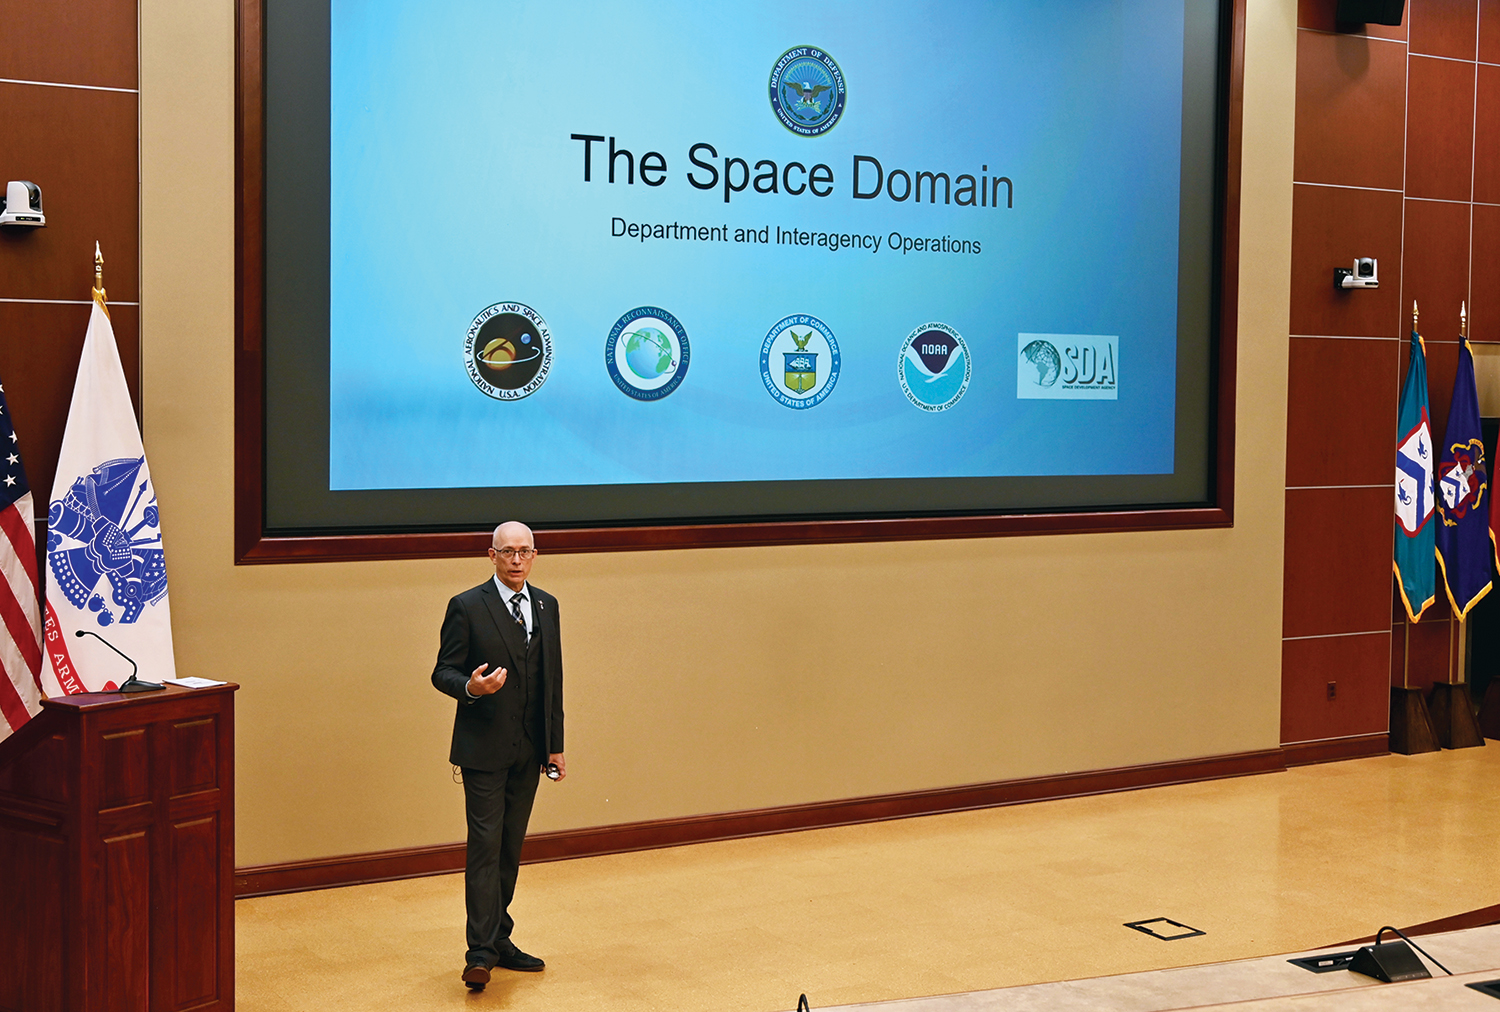 Mr. Thomas A. Gray, the U.S. Army Space and Missile Defense Command Liaison to the Combined Arms Center and Army University, leads the discussion in the second lecture of the InterAgency Brown-Bag Lecture Series for CGSC academic year 2021.